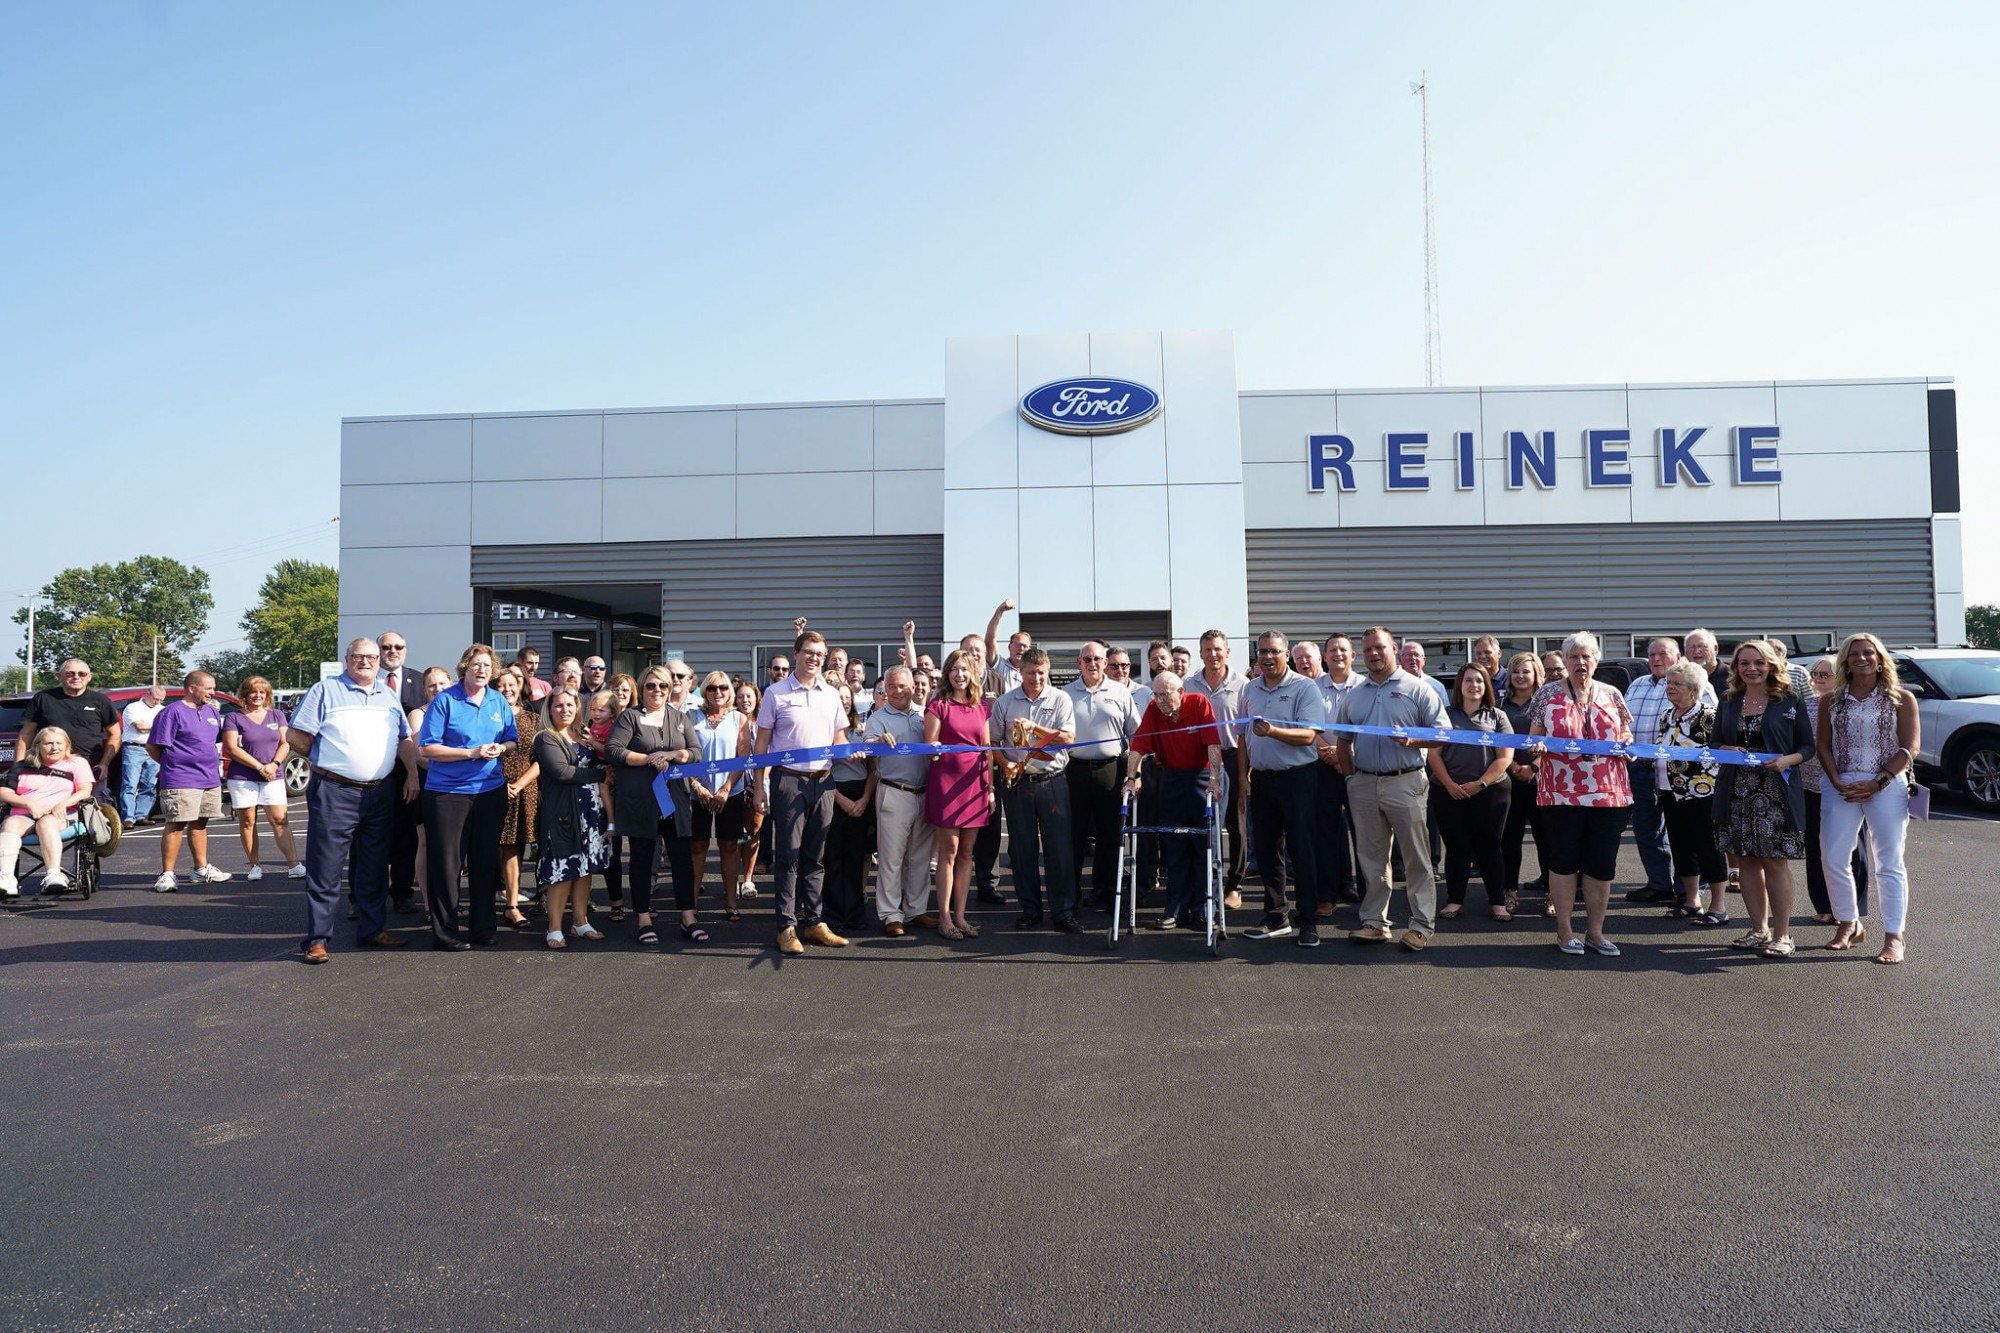 Reineke Family Dealerships Kicks Off After Five with a Ribbon Cutting to Celebrate all of their Renovations